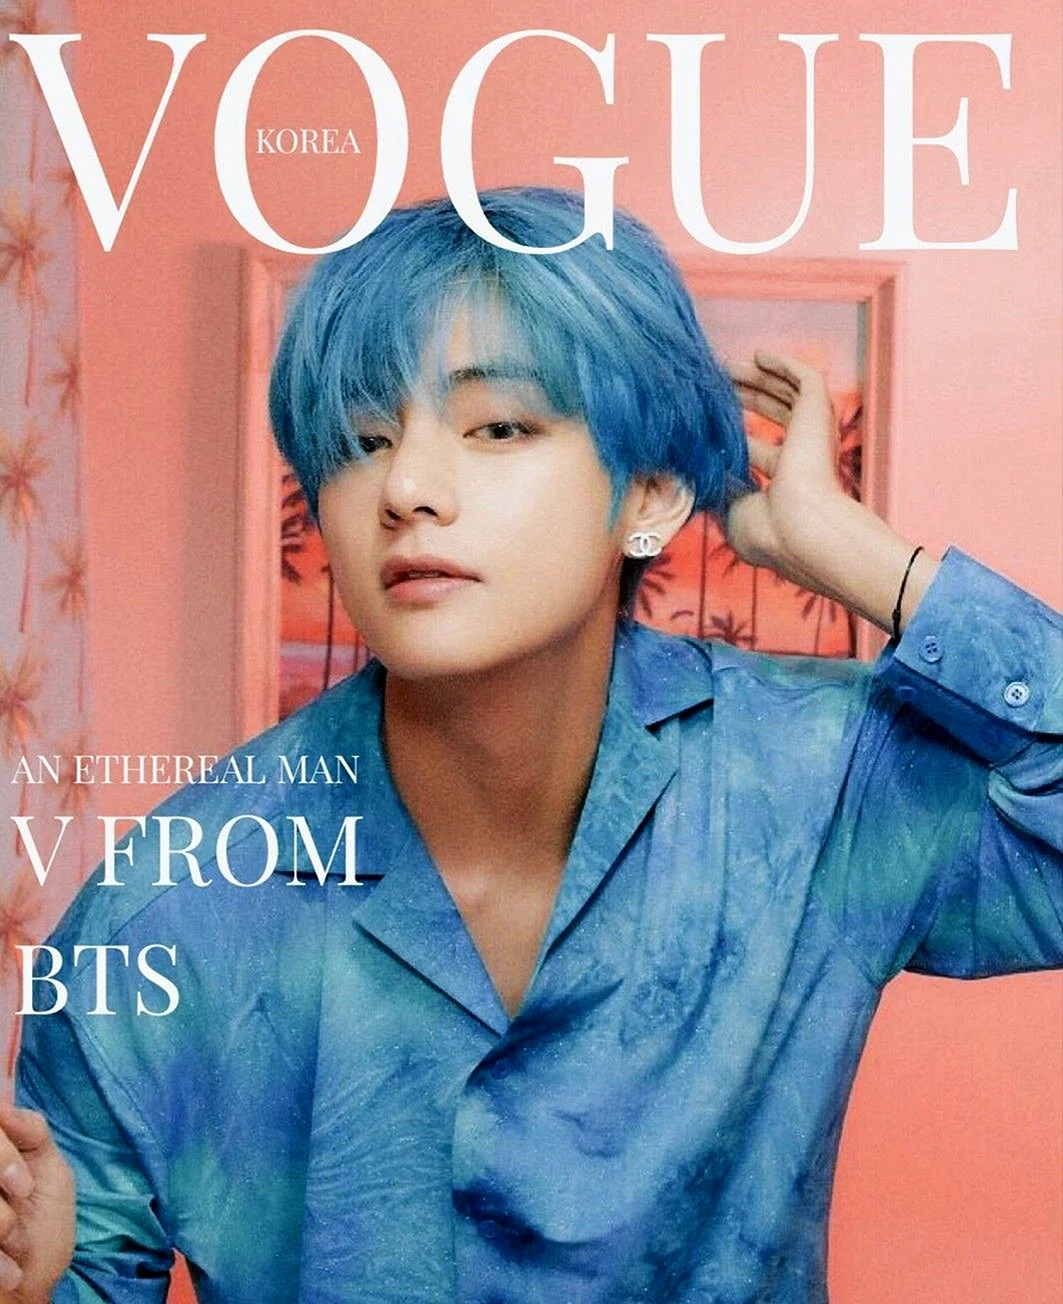 Bts Taehyung Wallpaper For iPhone